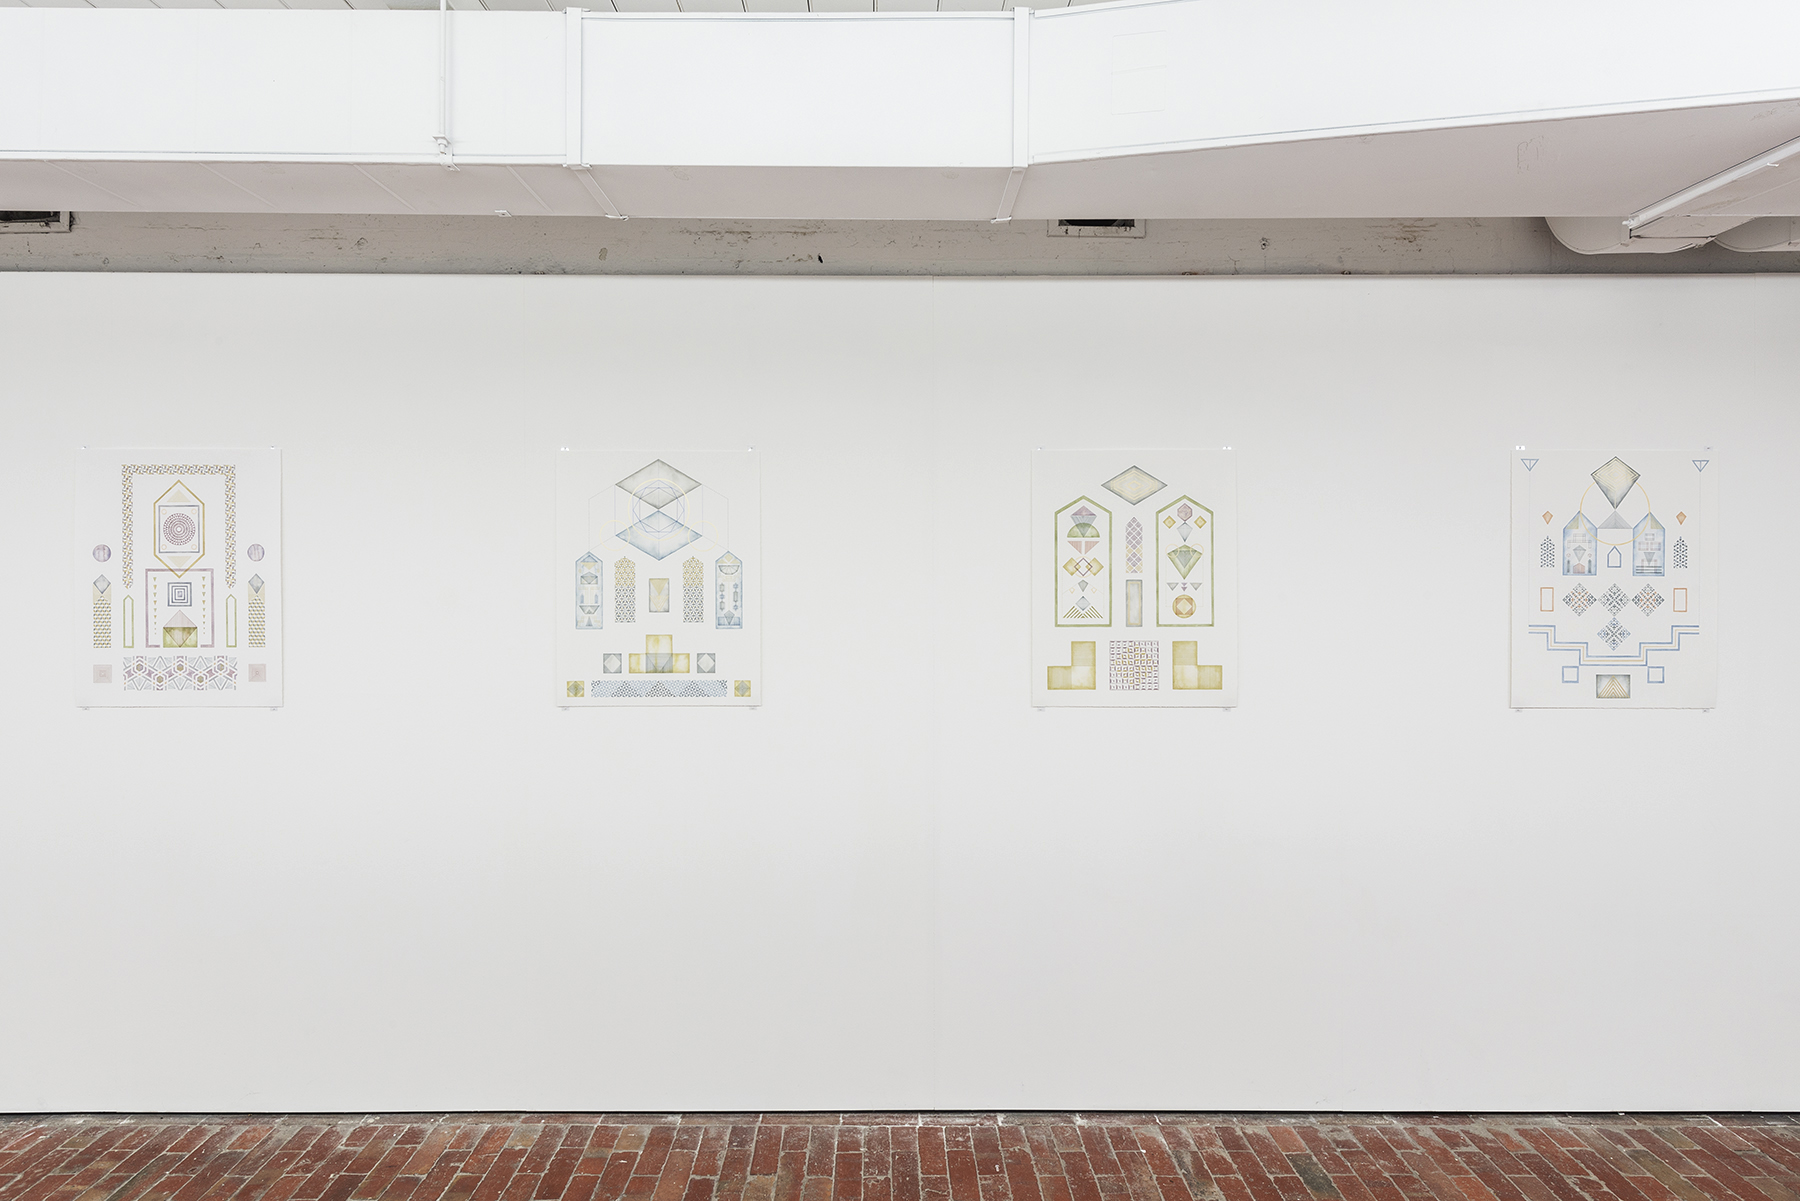  Recollection Series installation View 